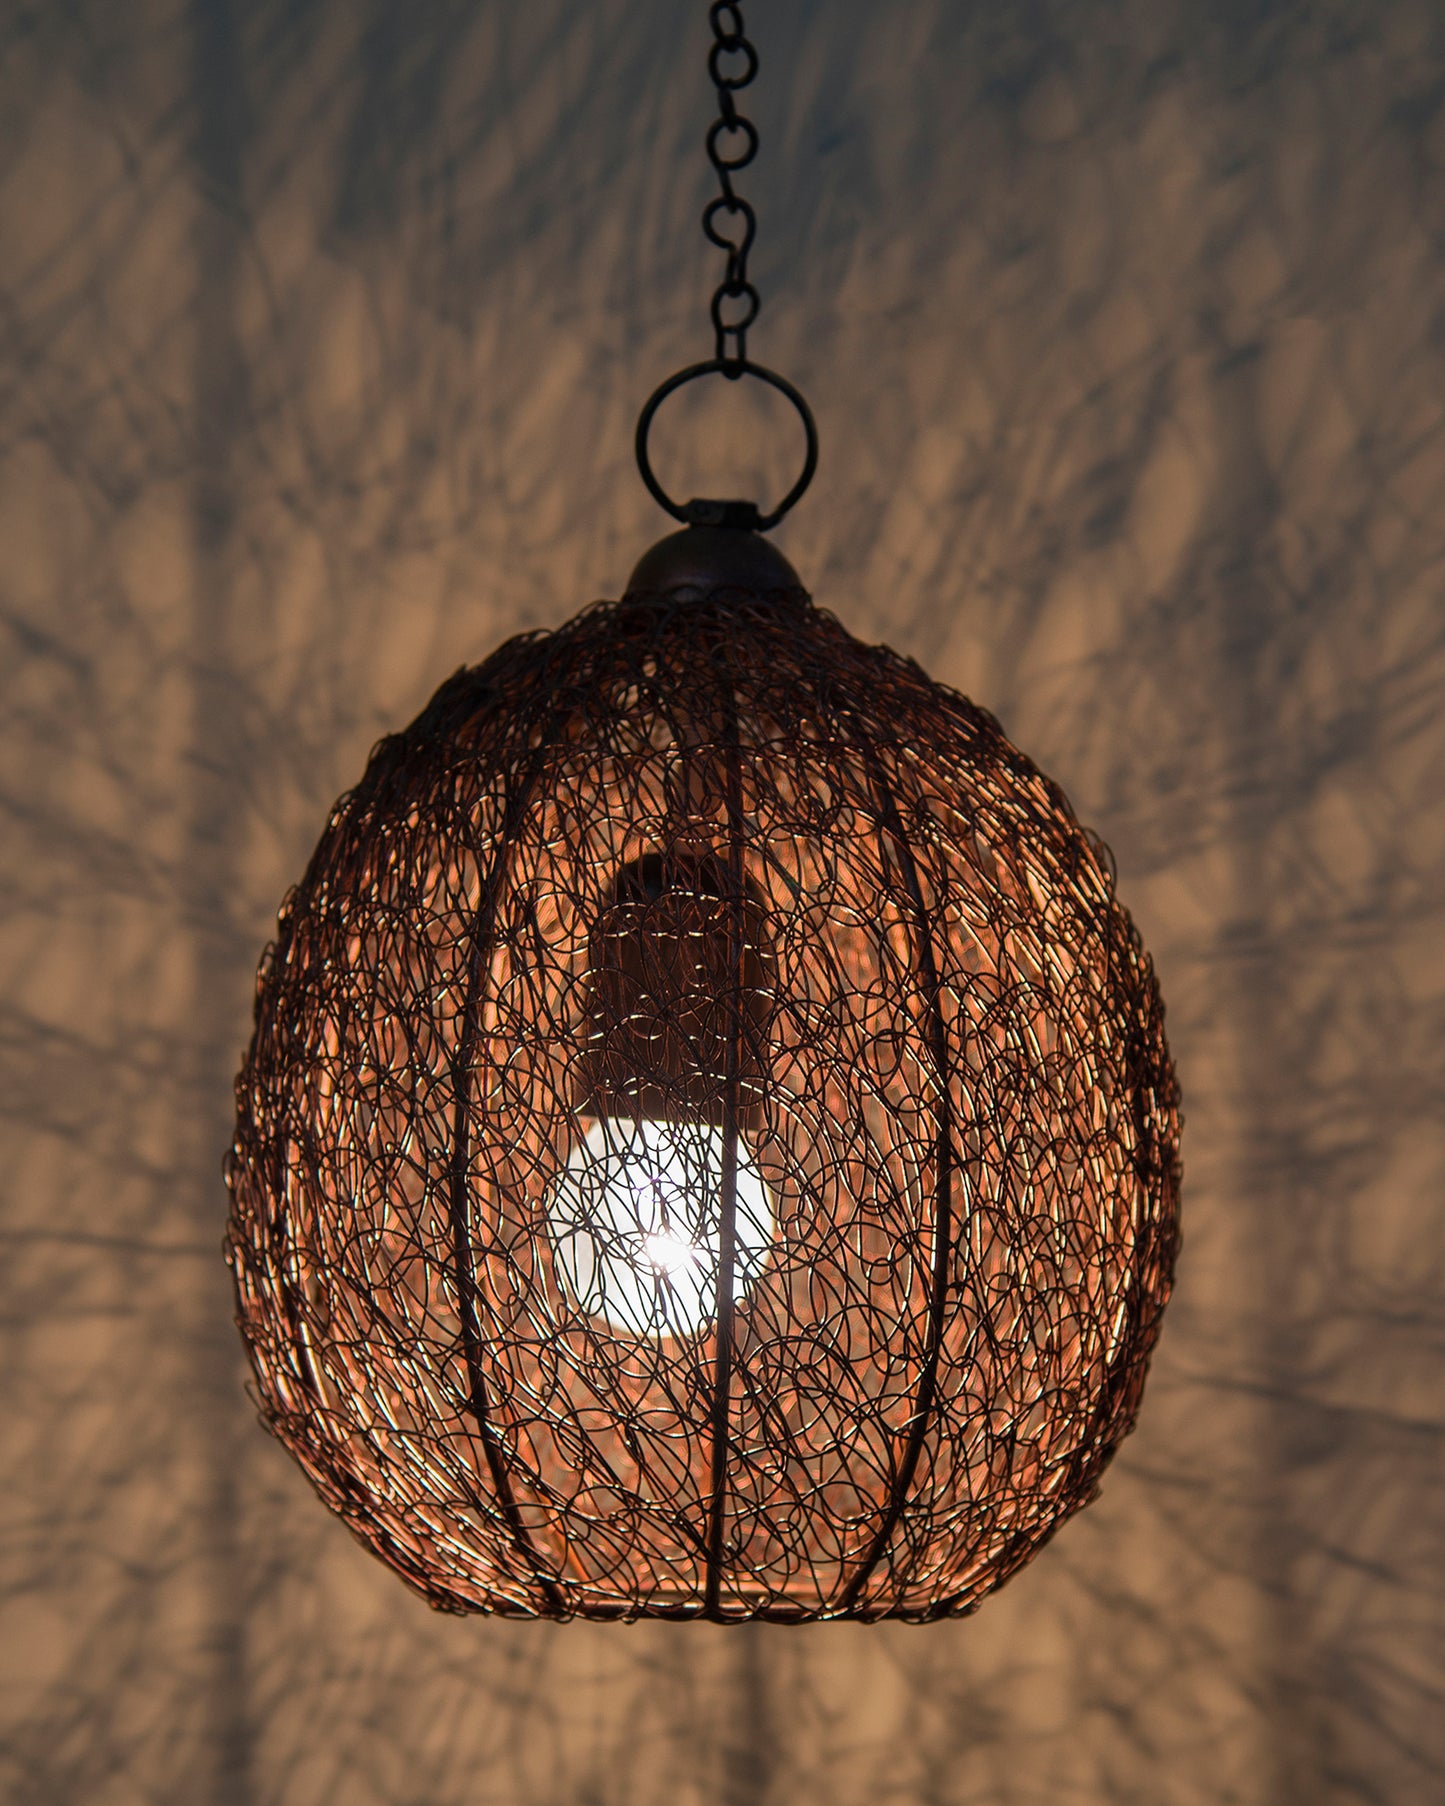 Classic twisted wire Round hanging pendant light, Hanging fixture lamp